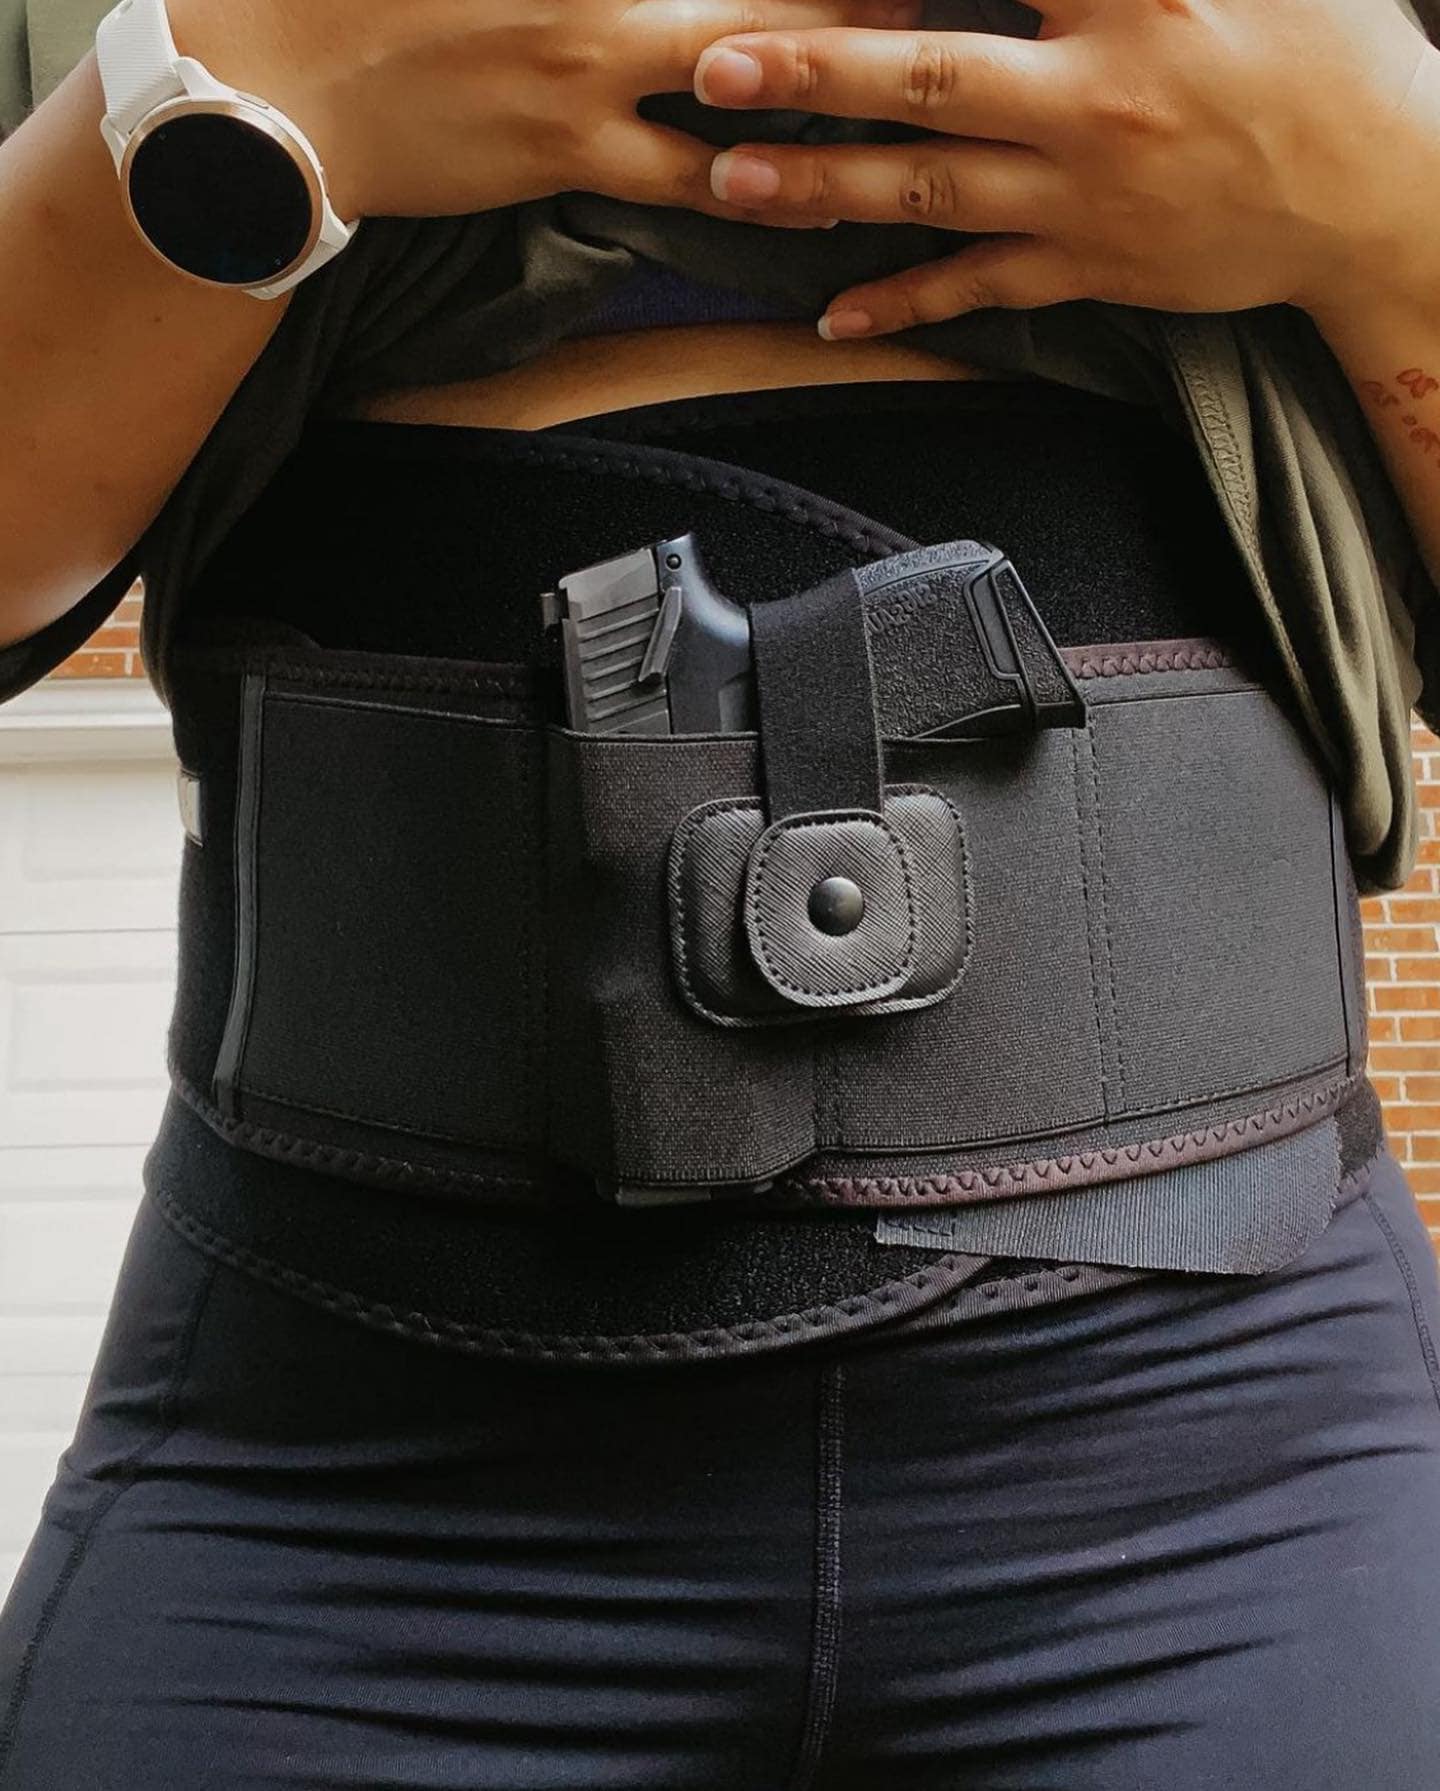 Jessie & James Women's Unisex Belly Band Gun Holster for Concealed